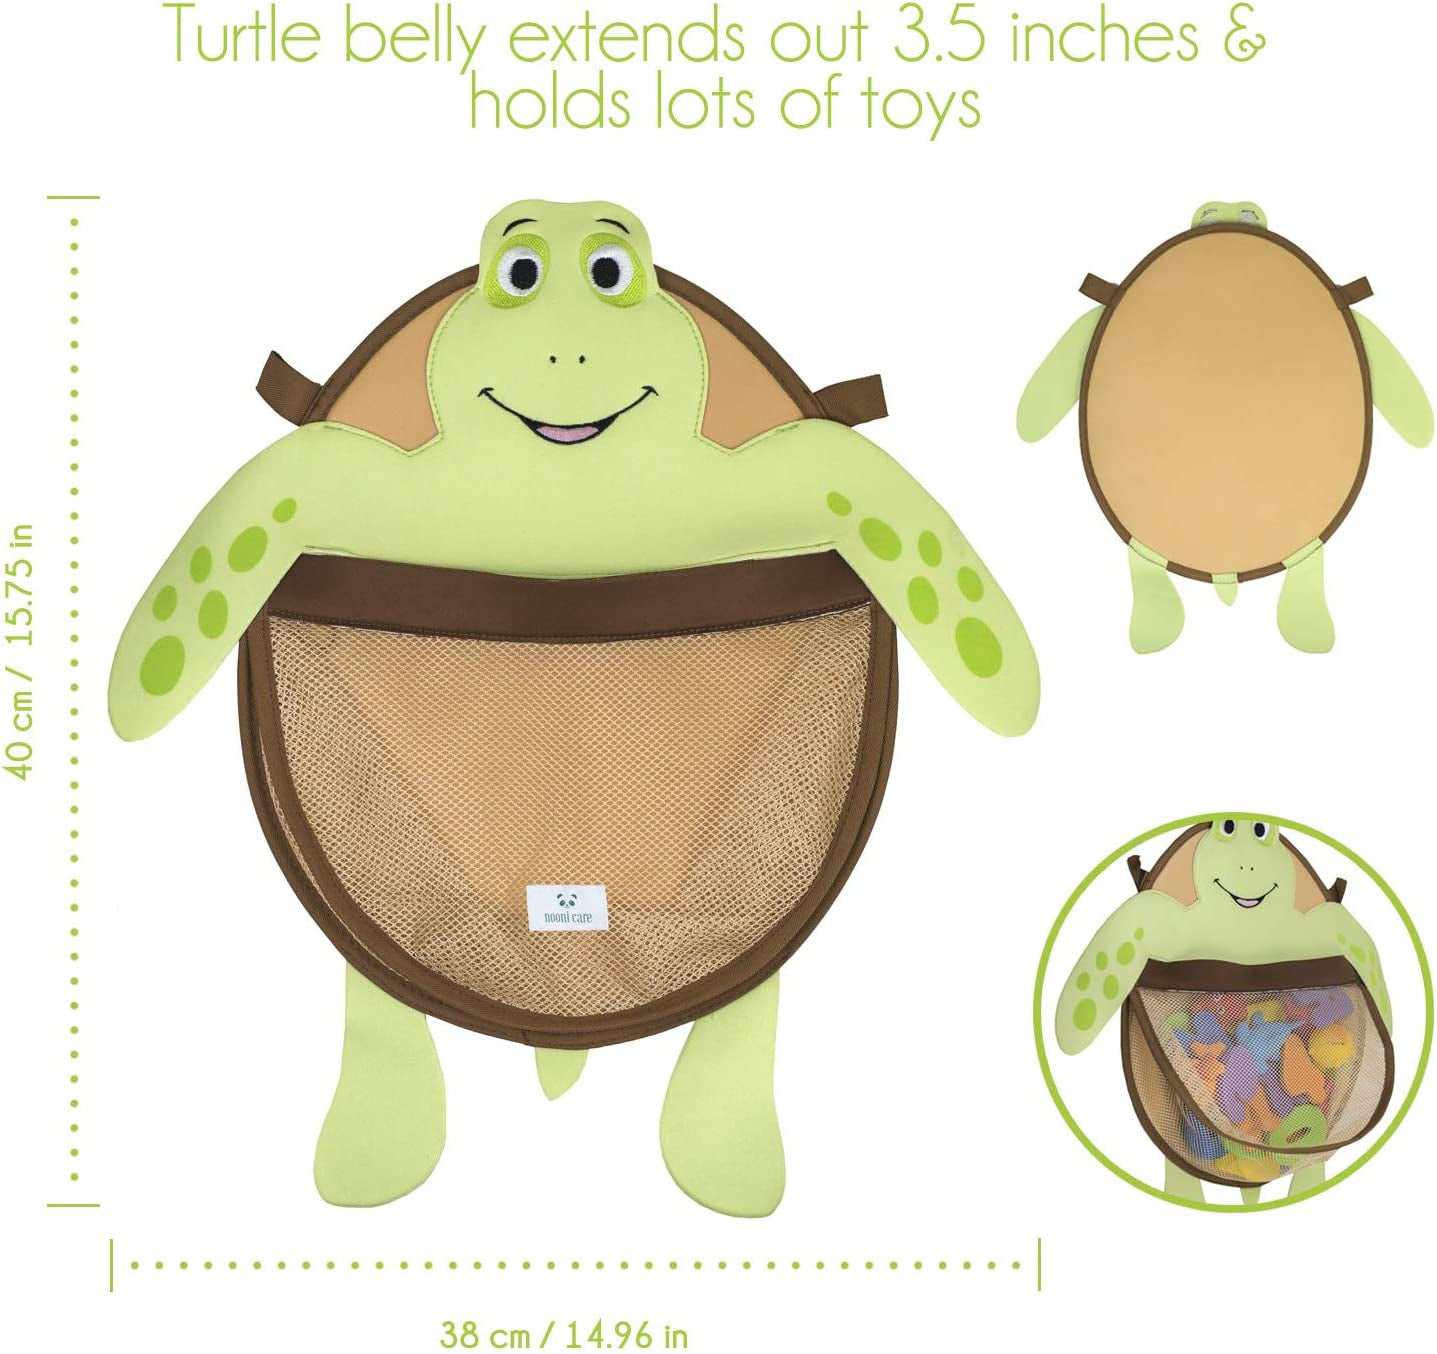 Bath Toy Storage Organiser | Bath Toy Holder W/ Bath Toy Net | Bath Net for Toys for Babies | Large Hanging Bath Toys Storage Bag | Turtle Mesh Net Basket | Two Extra Strong Suction Cups